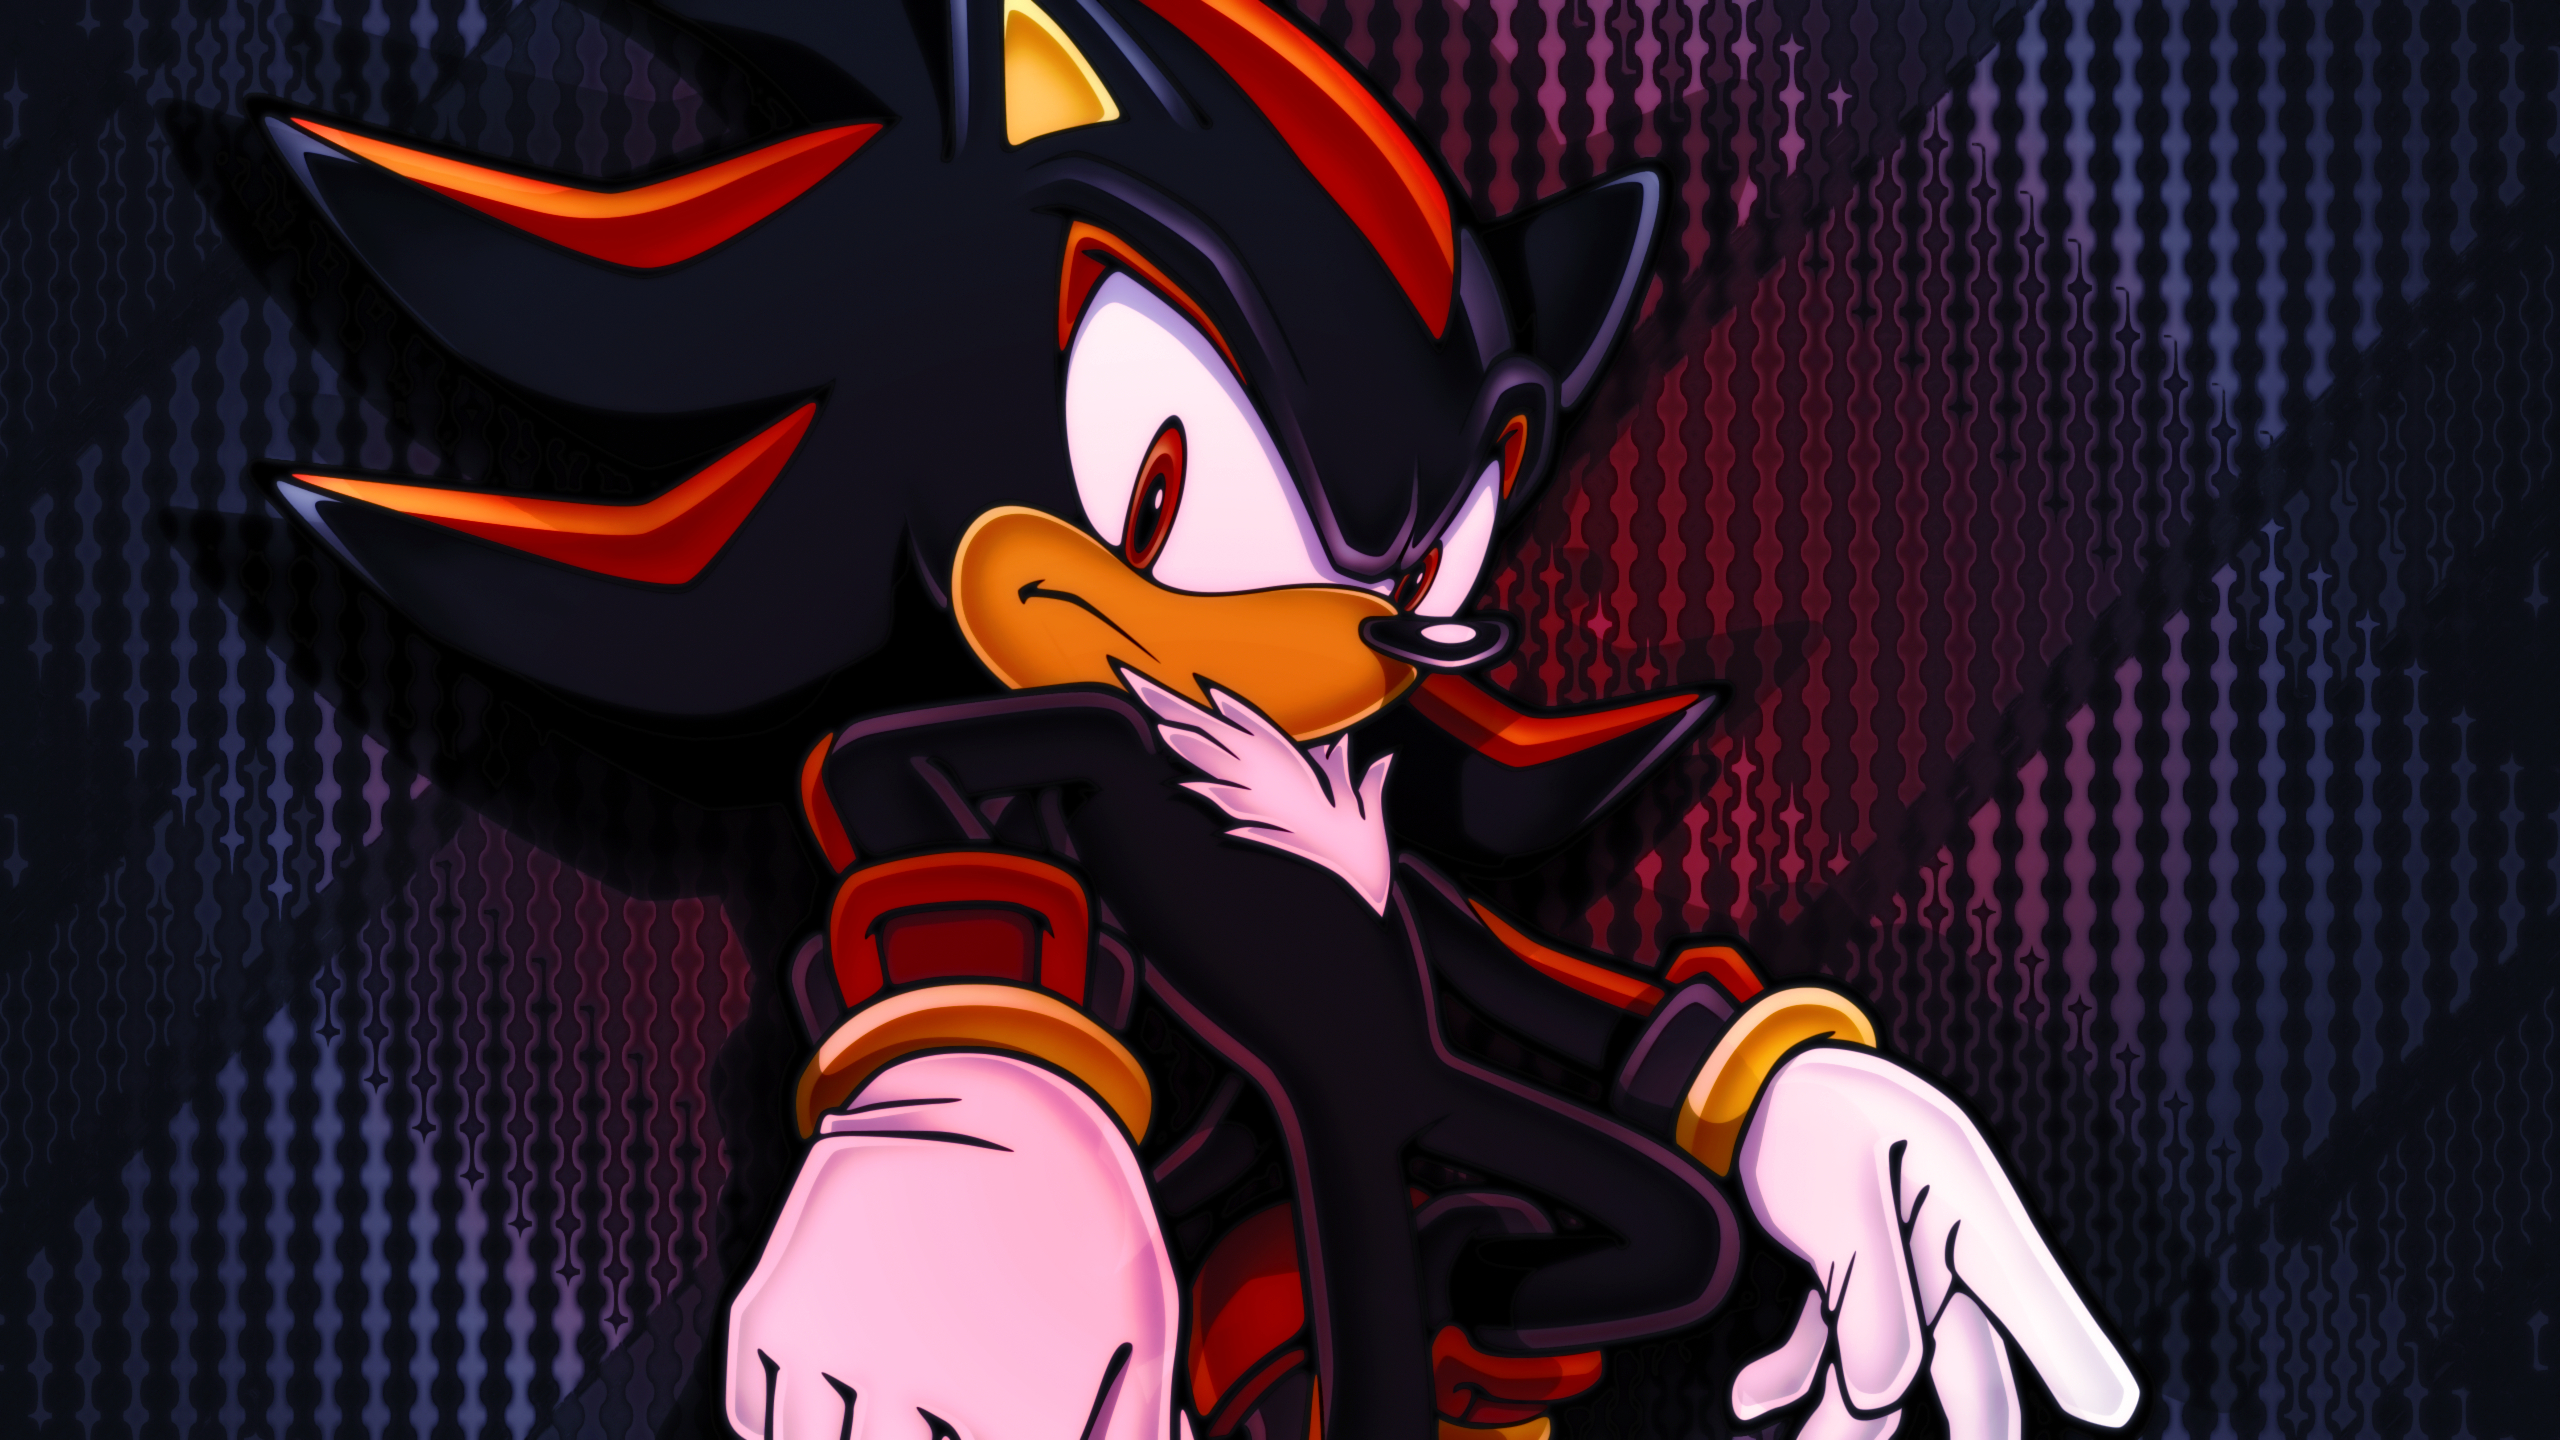 2560x1440 80+ Shadow the Hedgehog HD Wallpapers and Backgrounds